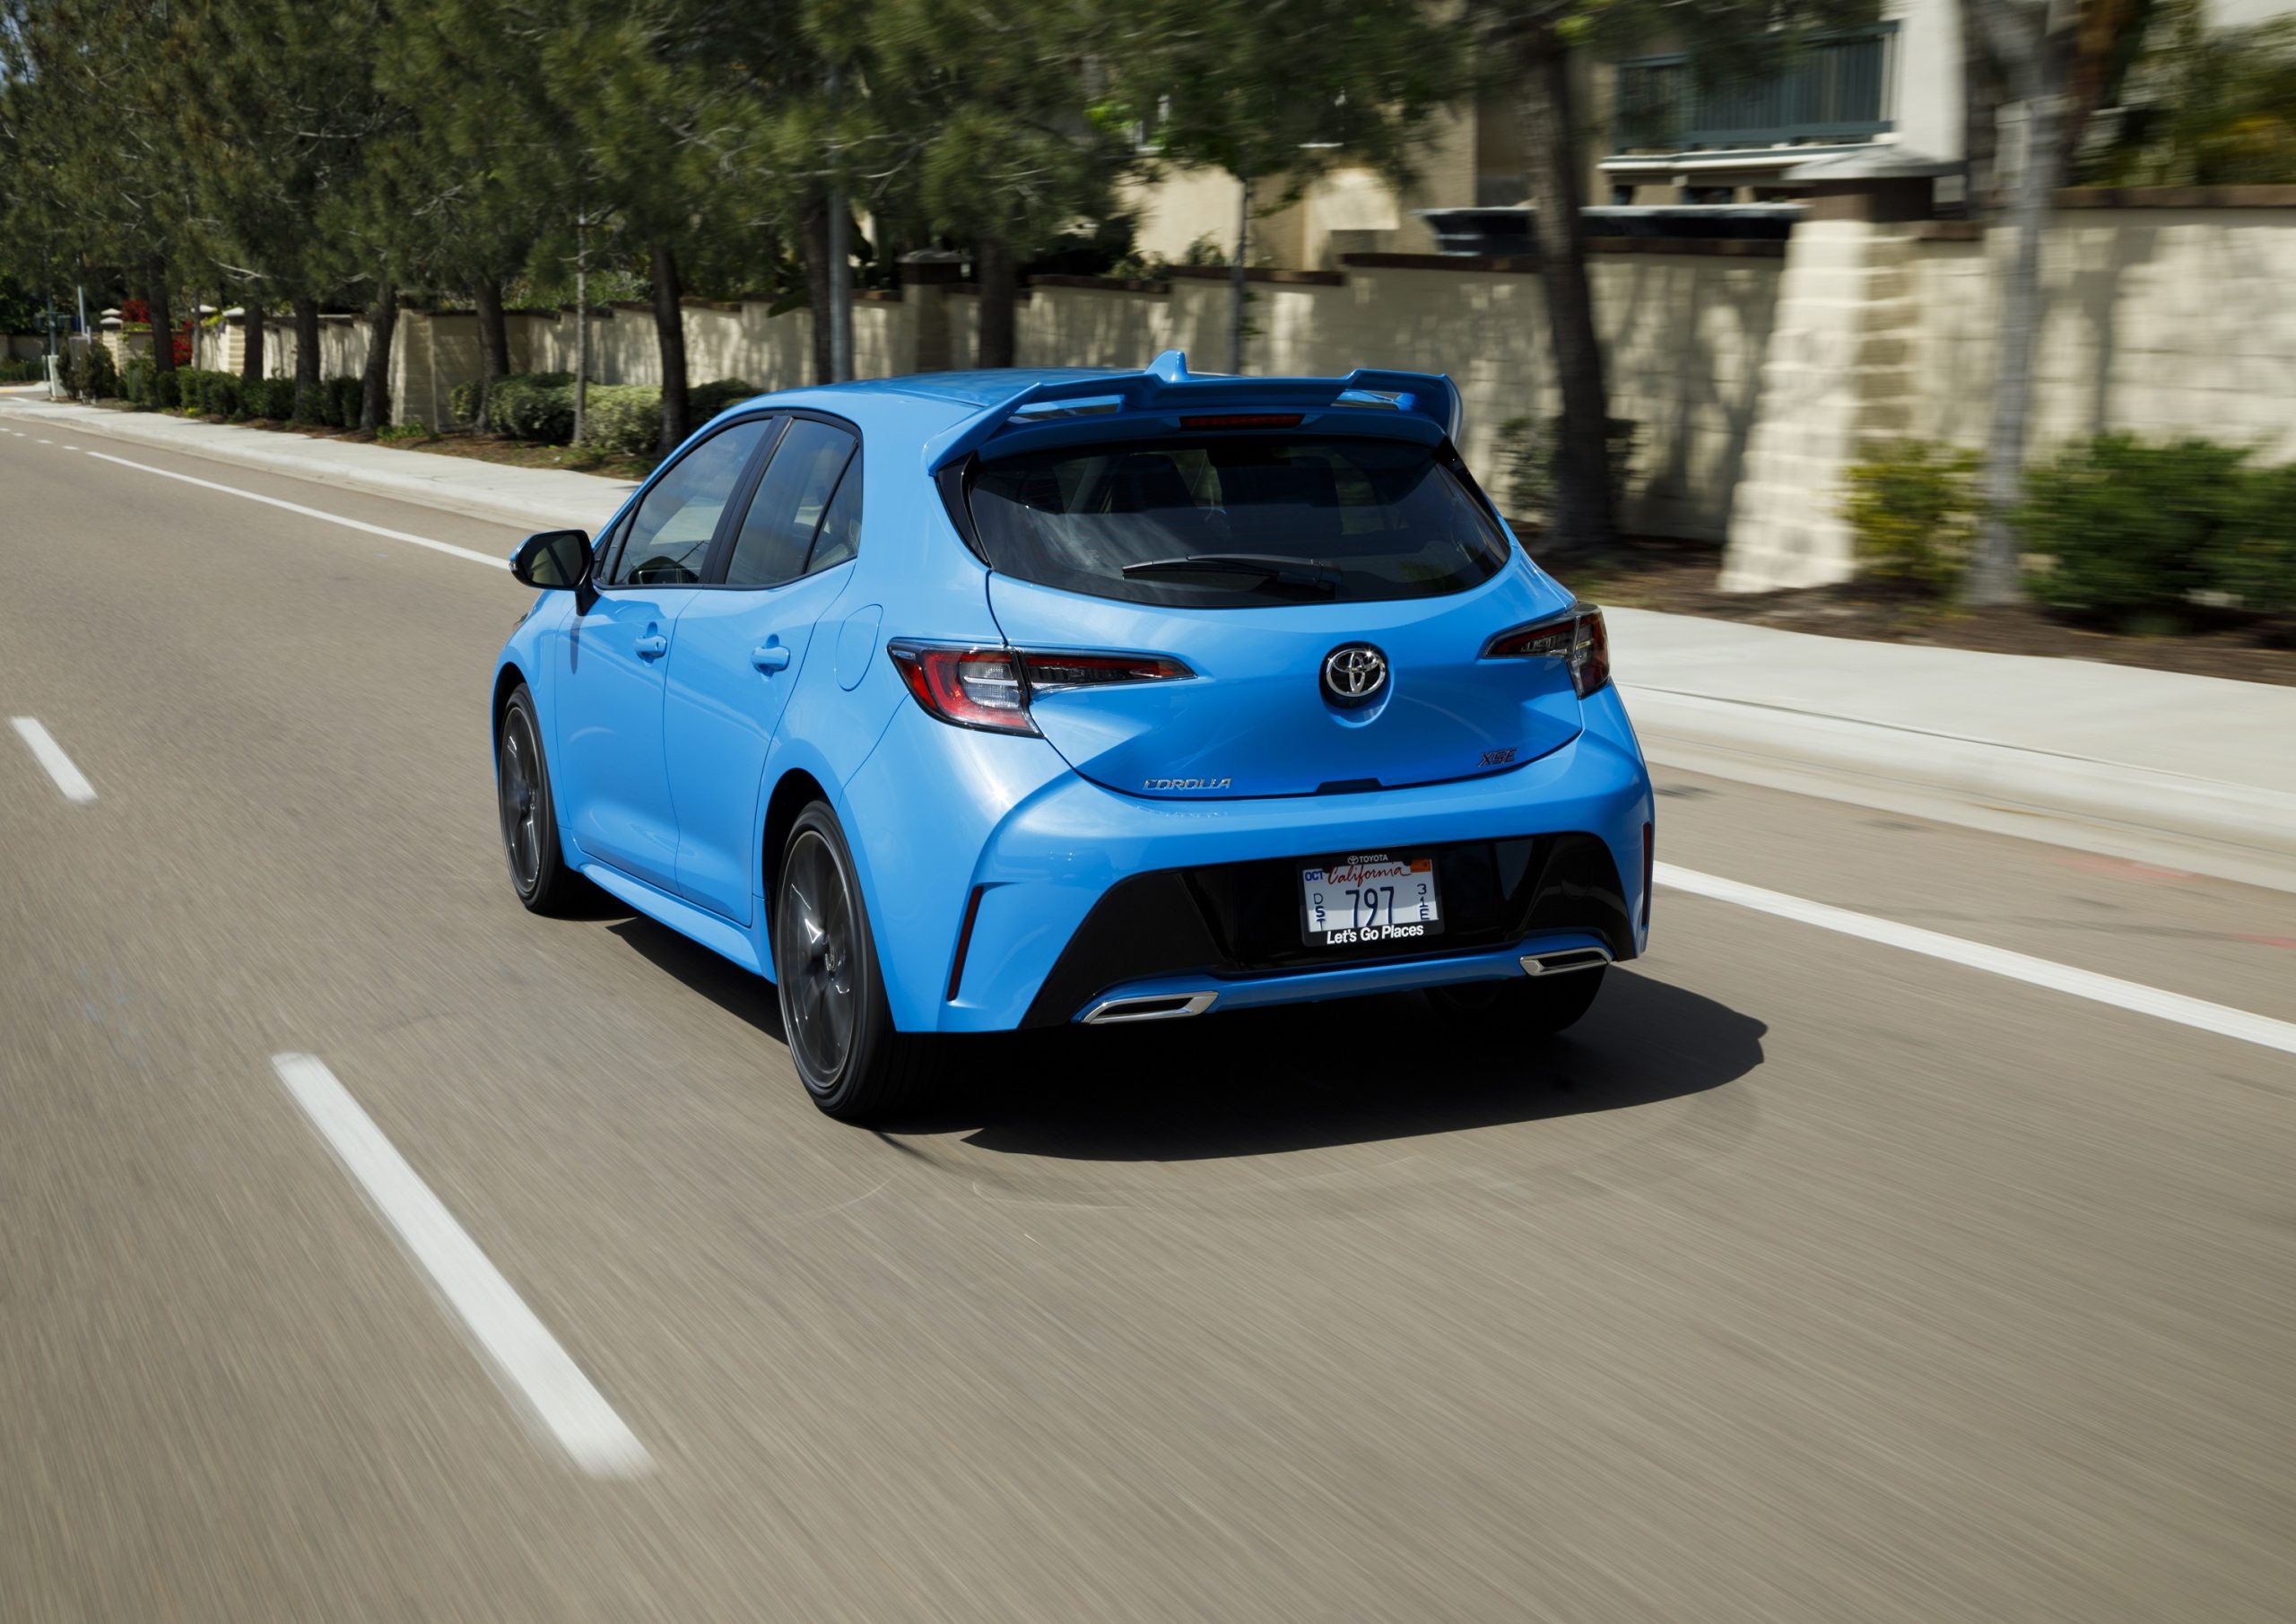 A blue Toyota Corolla hatchback, the basis for the new Toyota GR Corolla